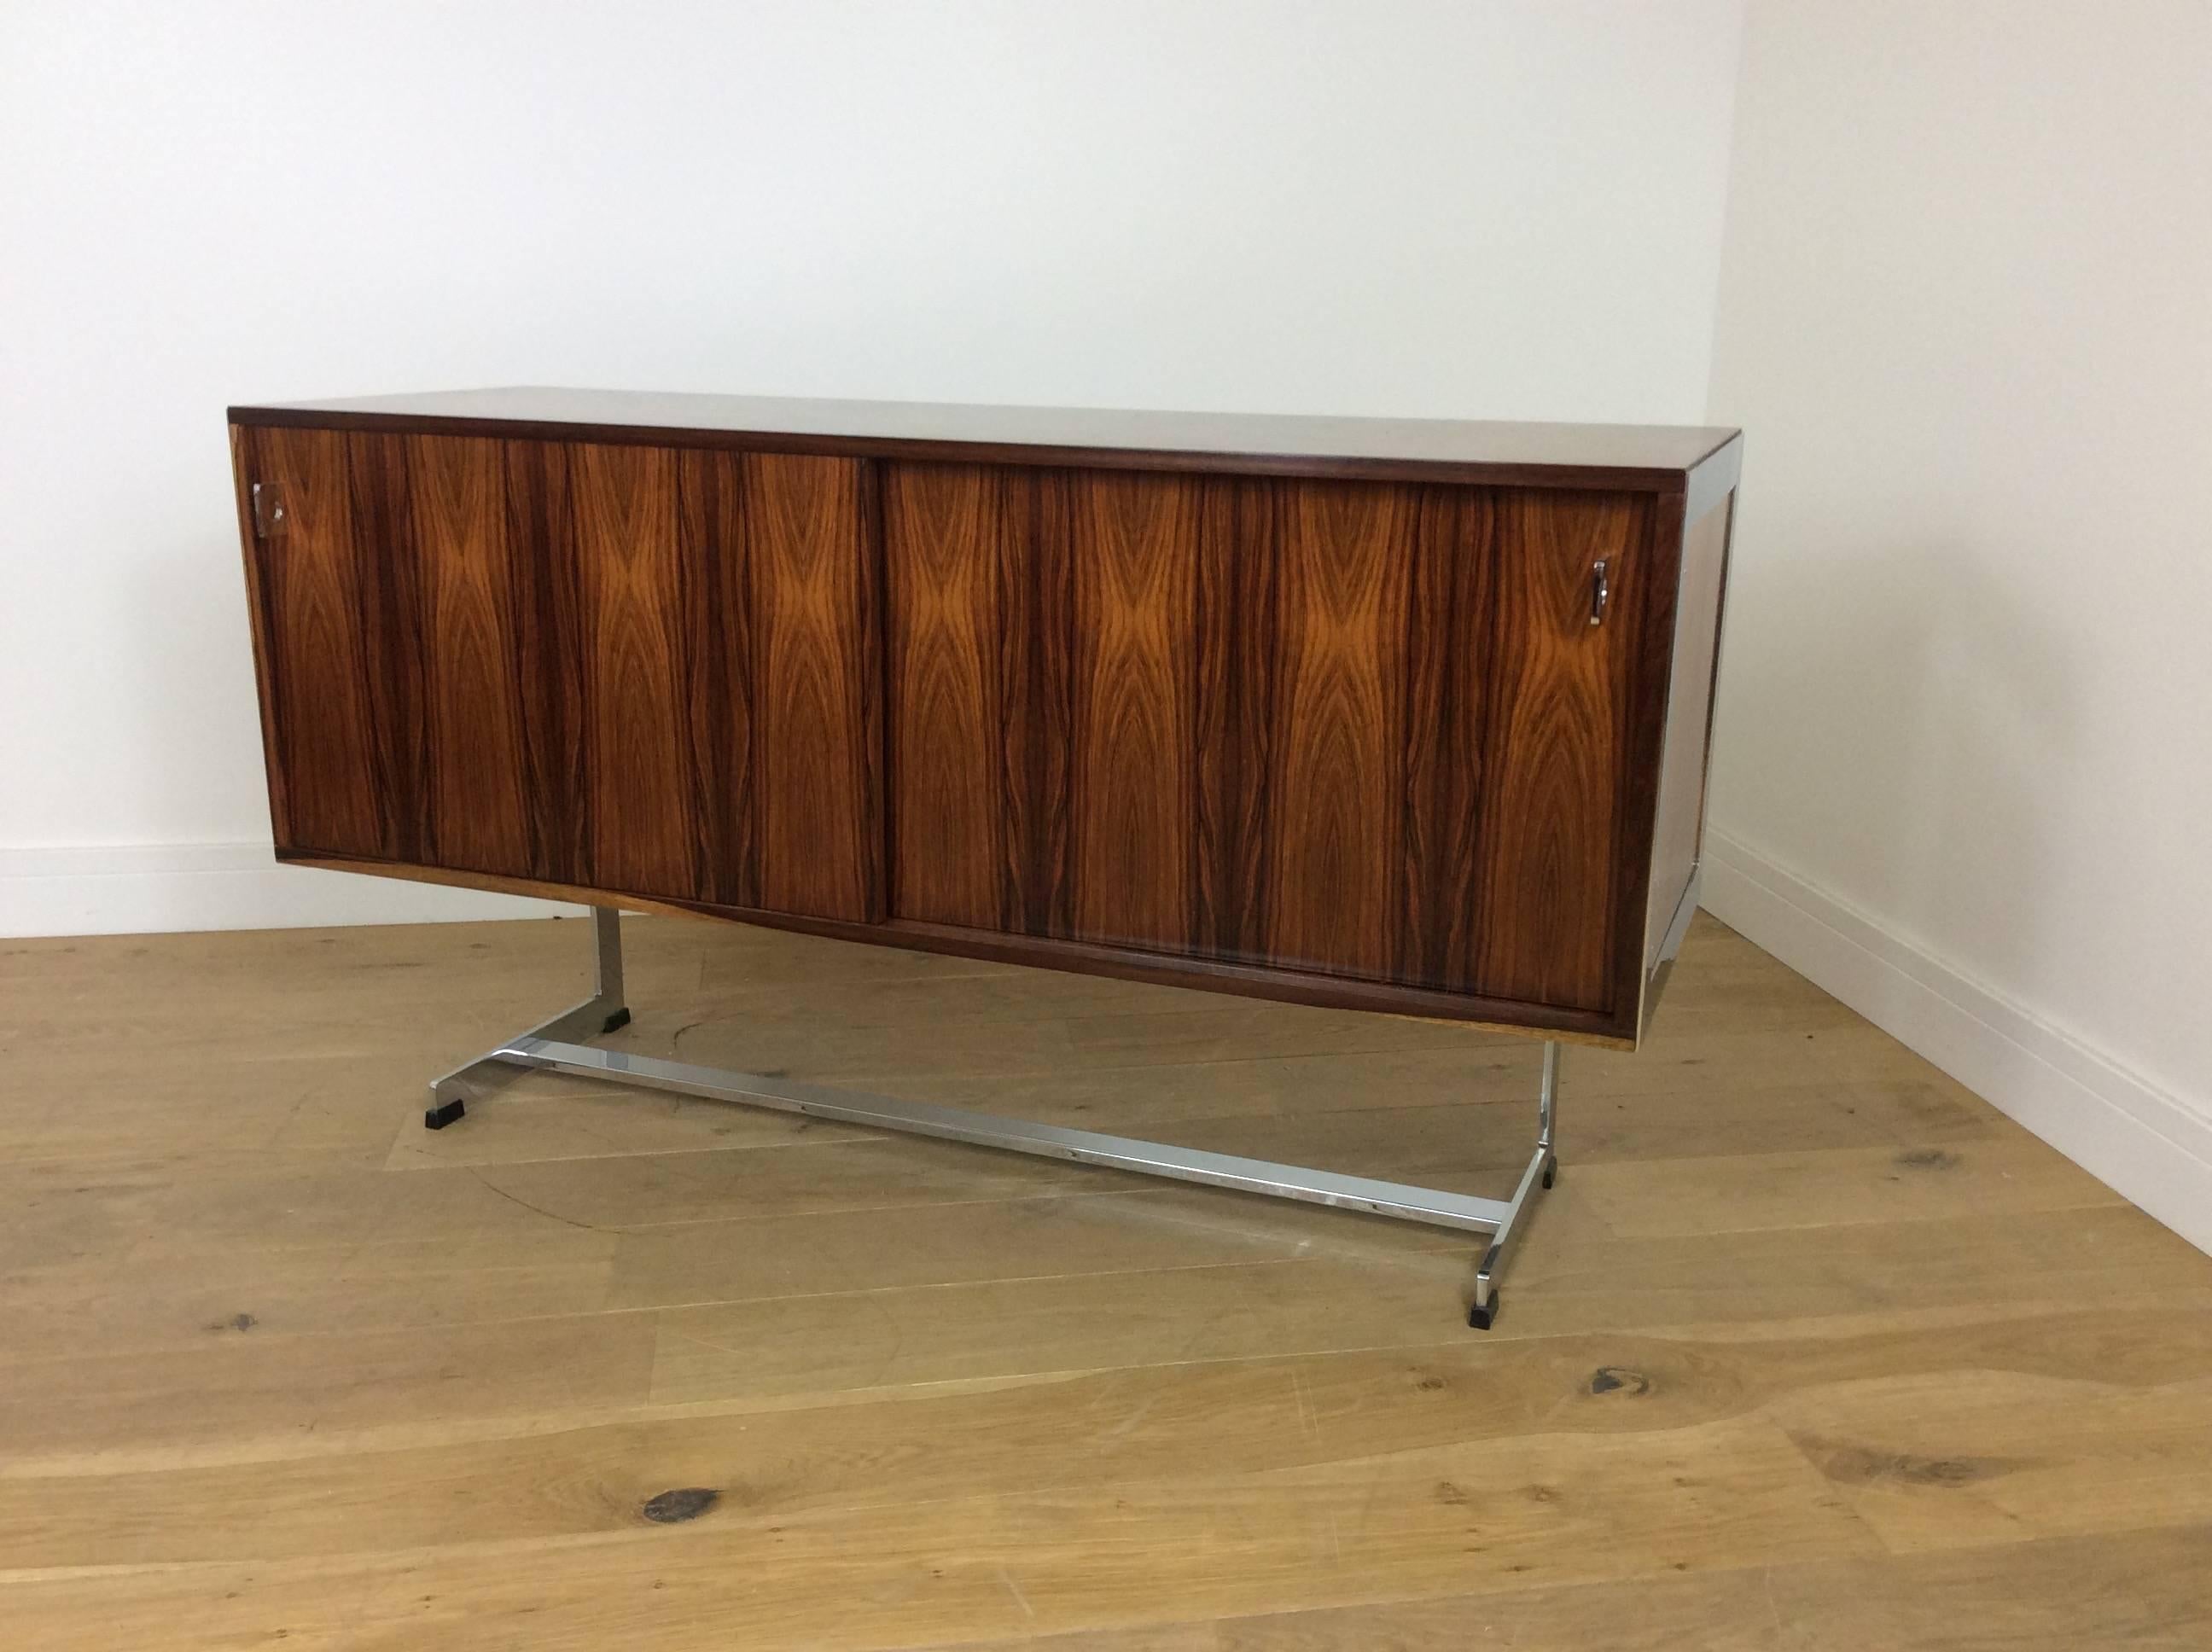 Midcentury rosewood and chrome sideboard by Merrow Associates.
Beautiful rosewood with high quality flat chrome, makes this a very desirable and extremely stylish sideboard or credenza.
Designed by Richard Young for Merrow Associates.
British,